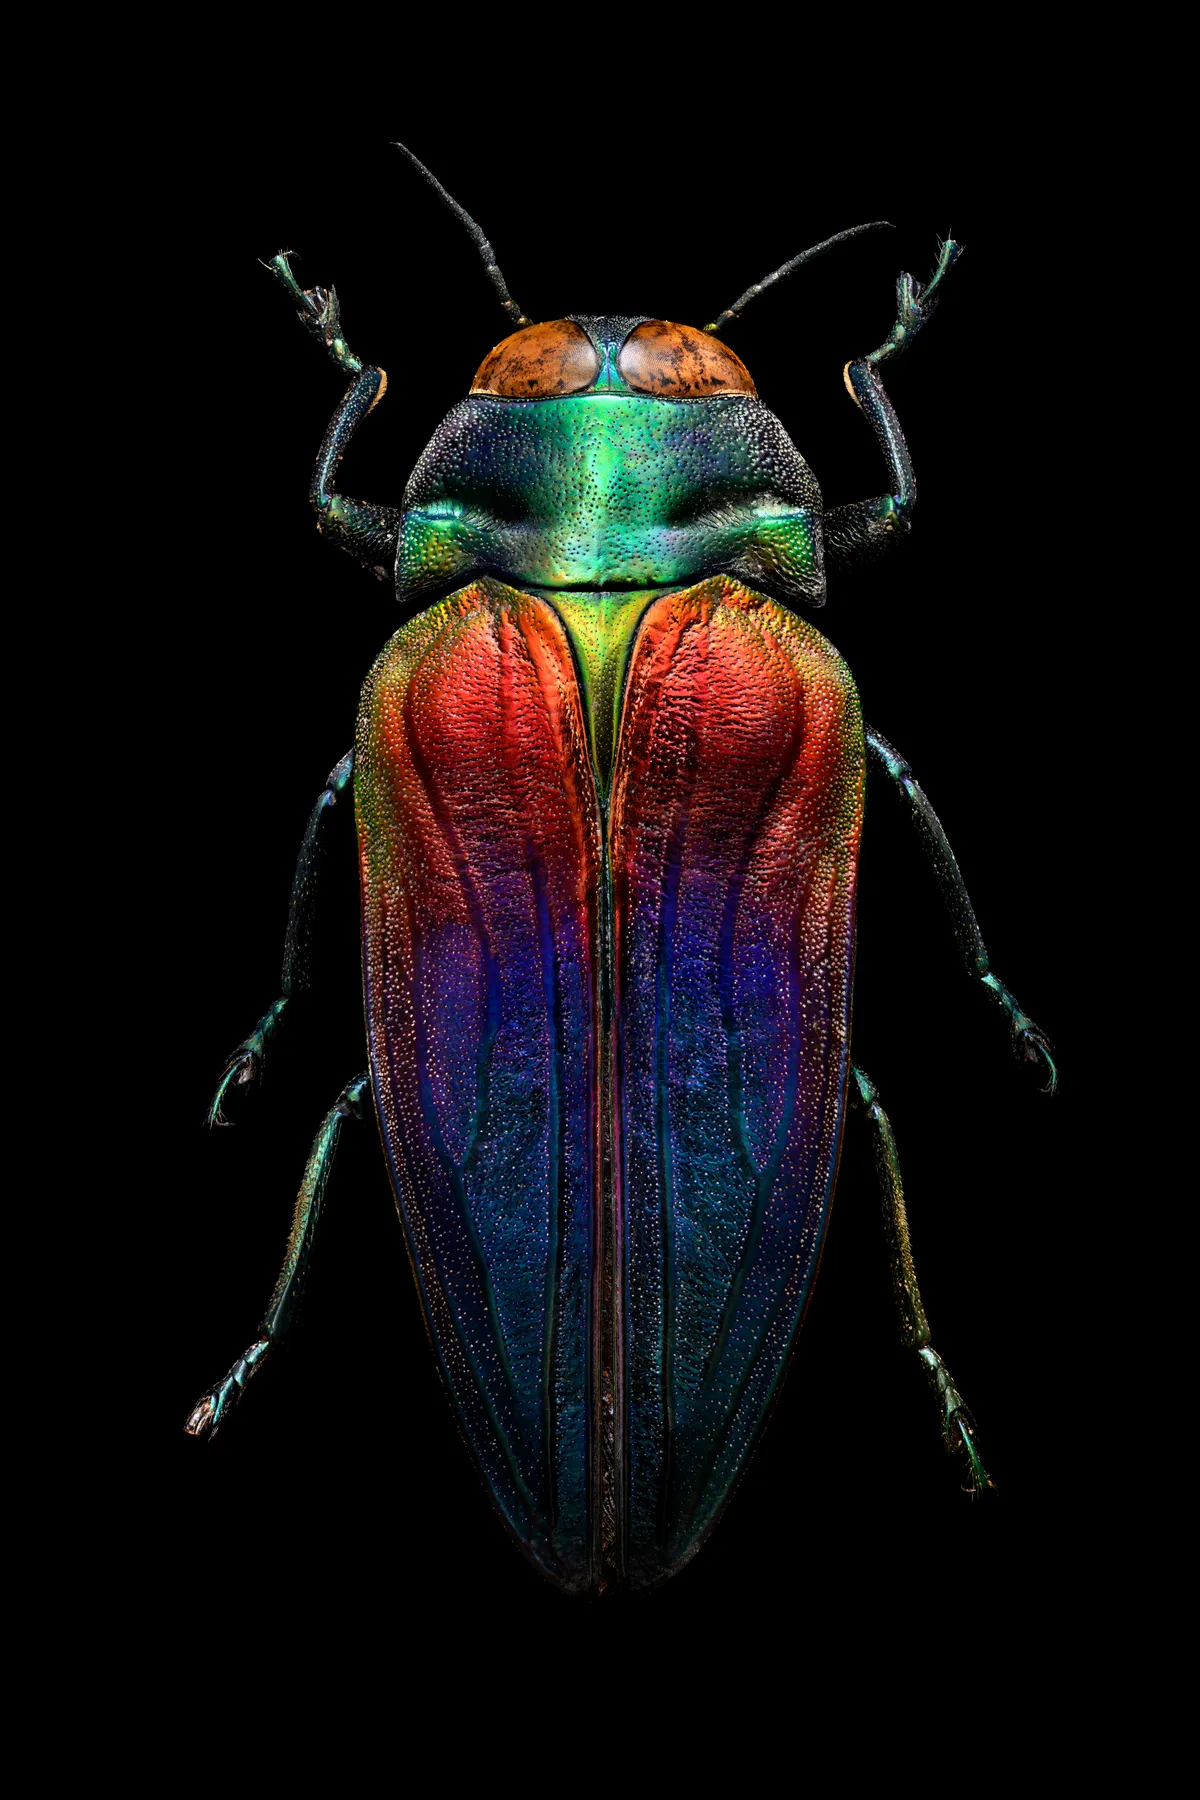 Tricoloured jewel beetle. This specimen was collected by the Victorian naturalist and explorer Alfred Russel Wallace in Seram between October 1859 and June 1860. © Levon Biss